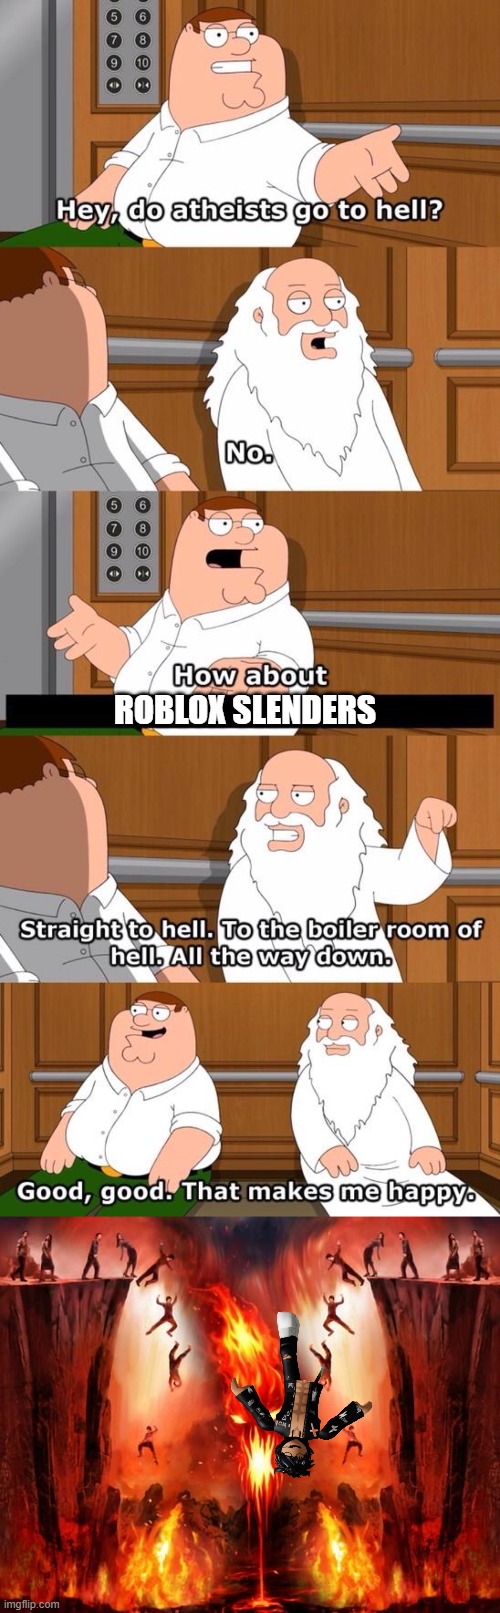 They deserve it... | ROBLOX SLENDERS | image tagged in the boiler room of hell,roblox oof,roblox,funny,front page,lol | made w/ Imgflip meme maker